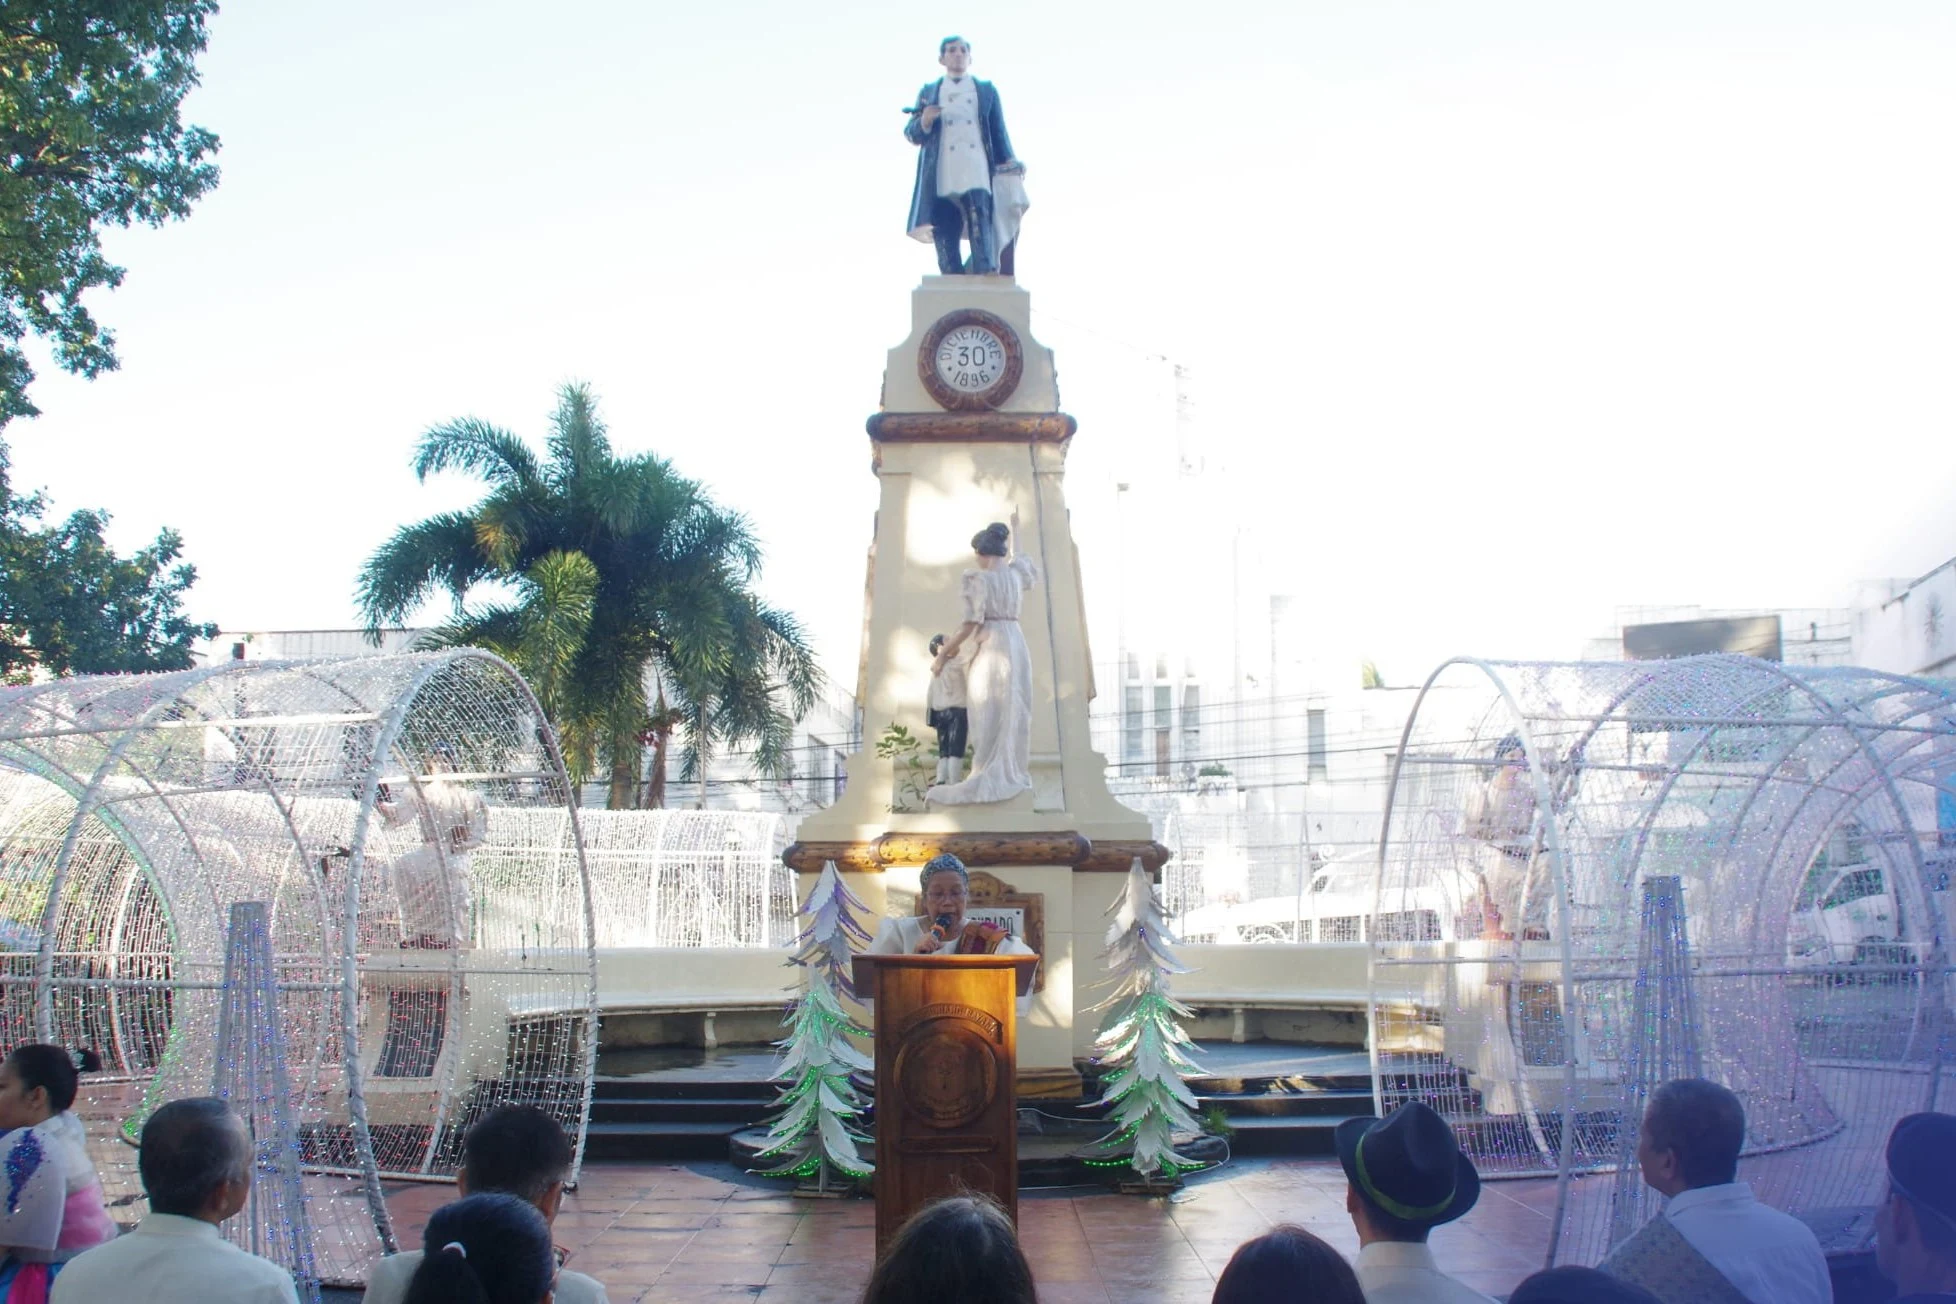 Inauguration of new monument to Jose Rizal in Sariaya